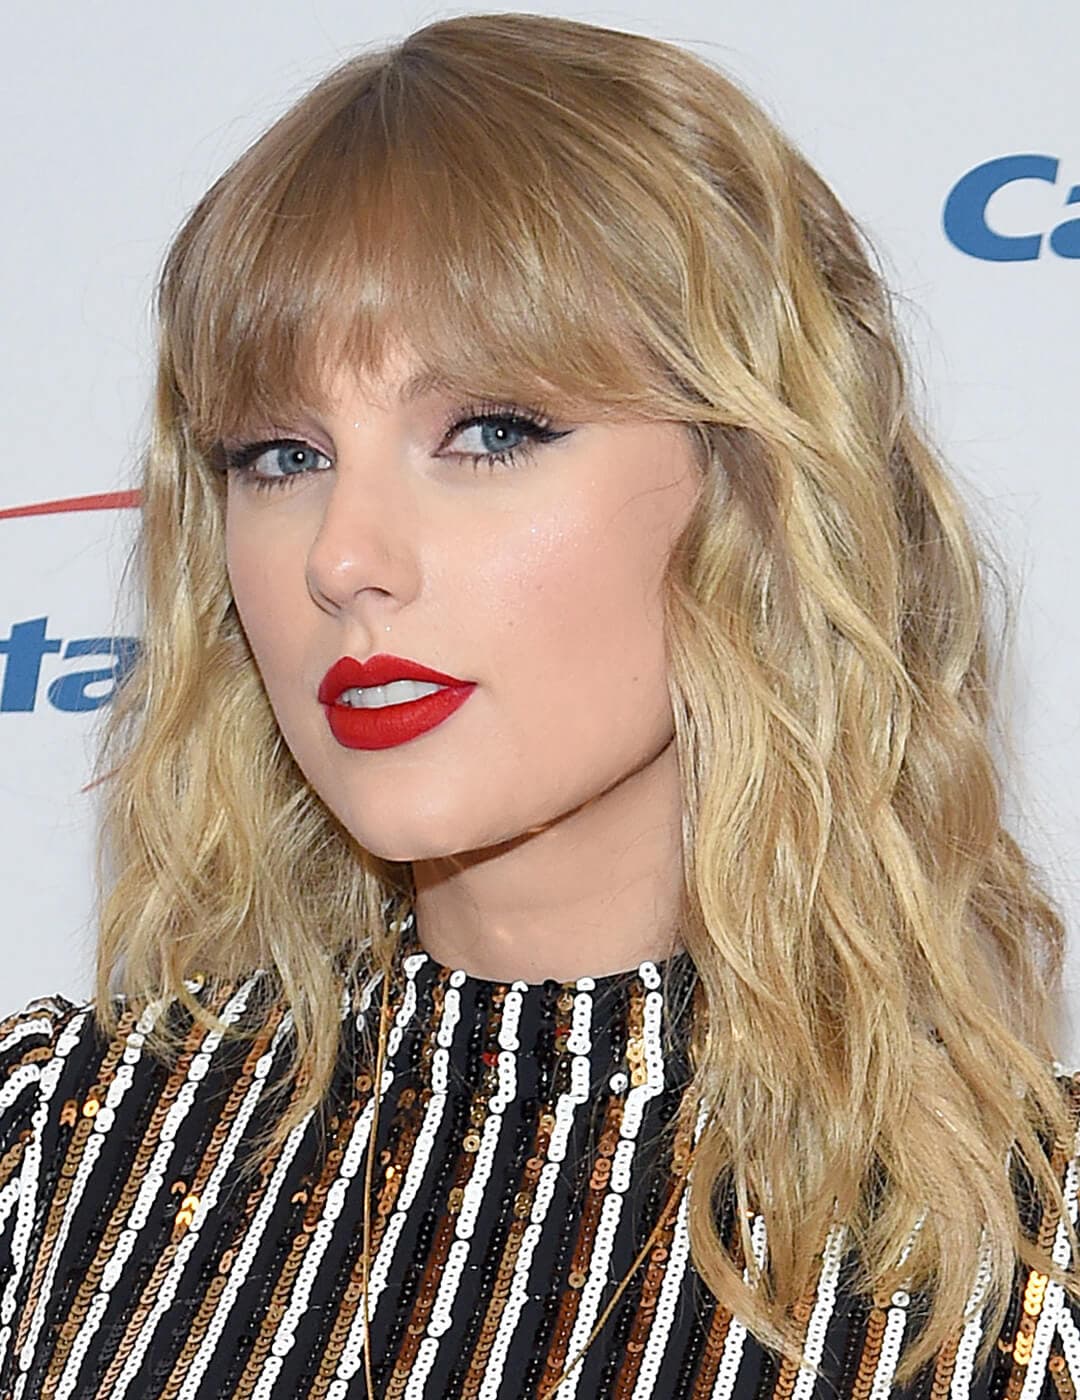 A photo of Taylor Swift with a shag cut hairstyle with bold red lips and wearing a sequin dress